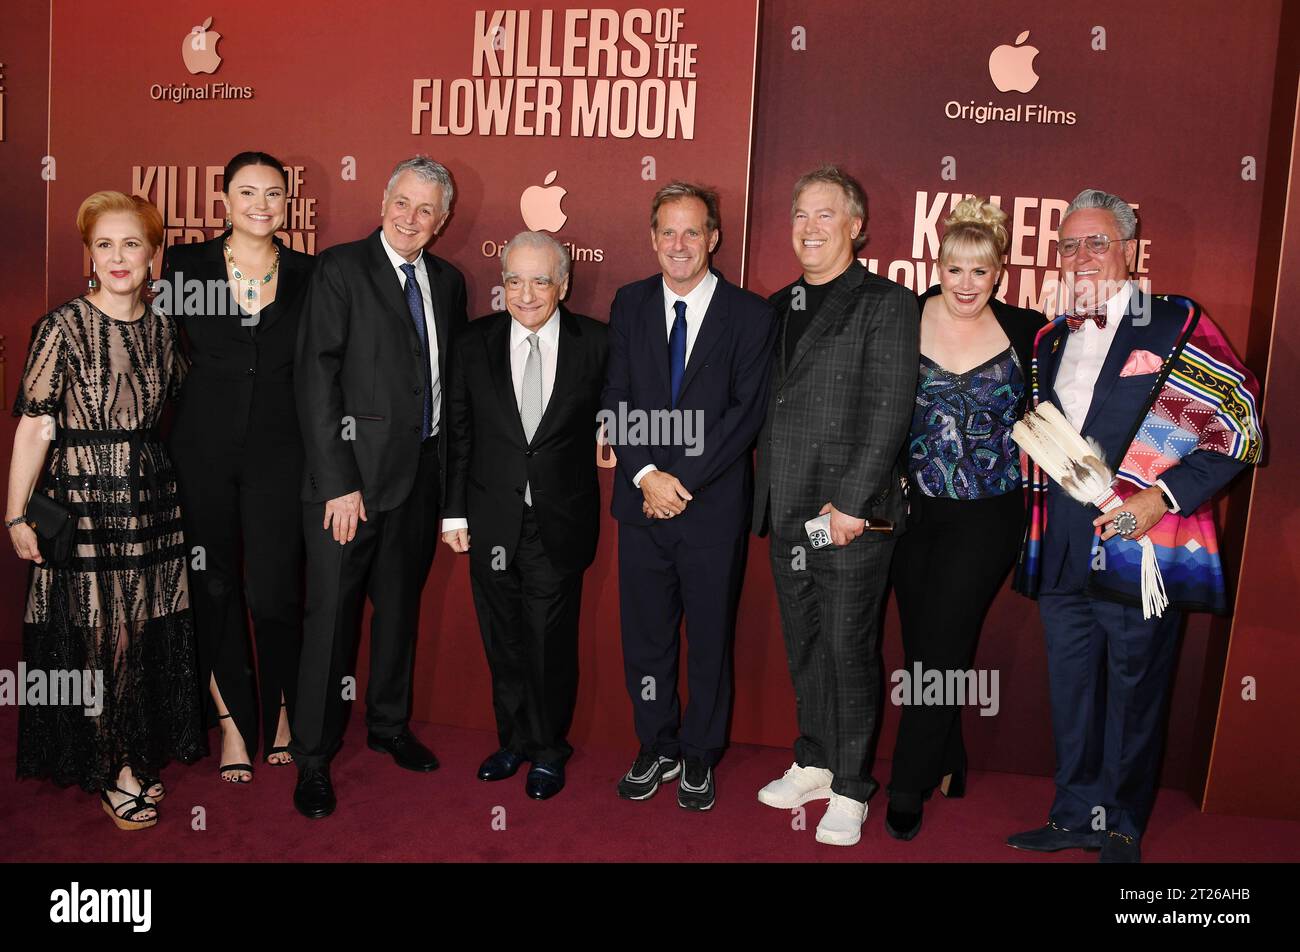 Los Angeles, California, USA. 16th Oct, 2023. (L-R) Marianne Bower, Justine Conte, Daniel Lupi, Martin Scorsese, Bradley Thomas, Rick Yorn and Lisa Frechette attend the Los Angeles Premiere of Apple TV 's 'Killer Of The Flower Moon' at the Dolby Theatre on October 16, 2023 in Los Angeles, California. Credit: Jeffrey Mayer/Jtm Photos/Media Punch/Alamy Live News Stock Photo